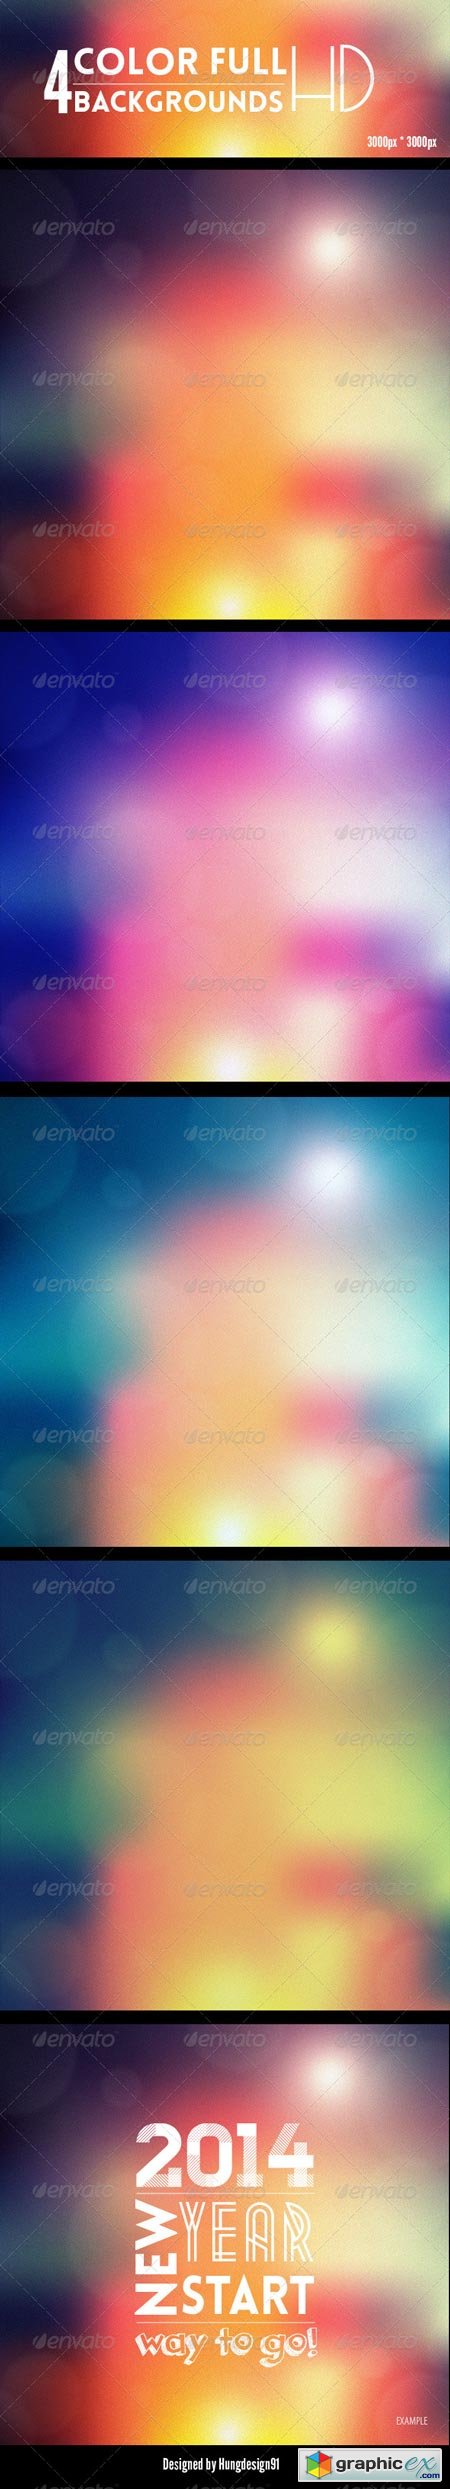 4 Amazing Color Full Backgrounds 6888439